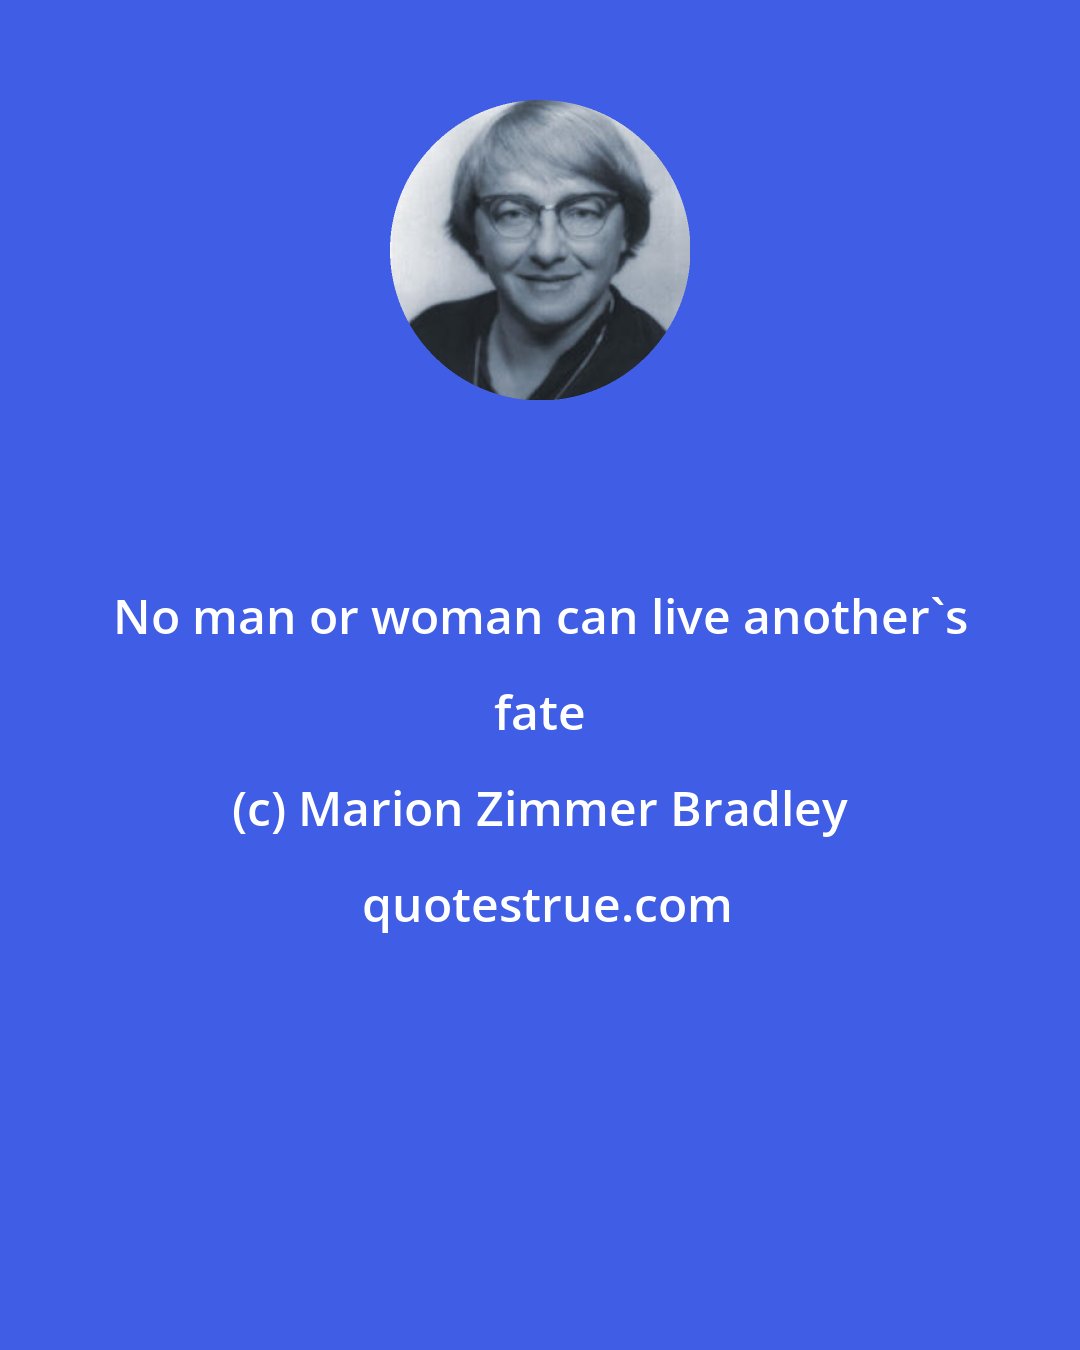 Marion Zimmer Bradley: No man or woman can live another's fate